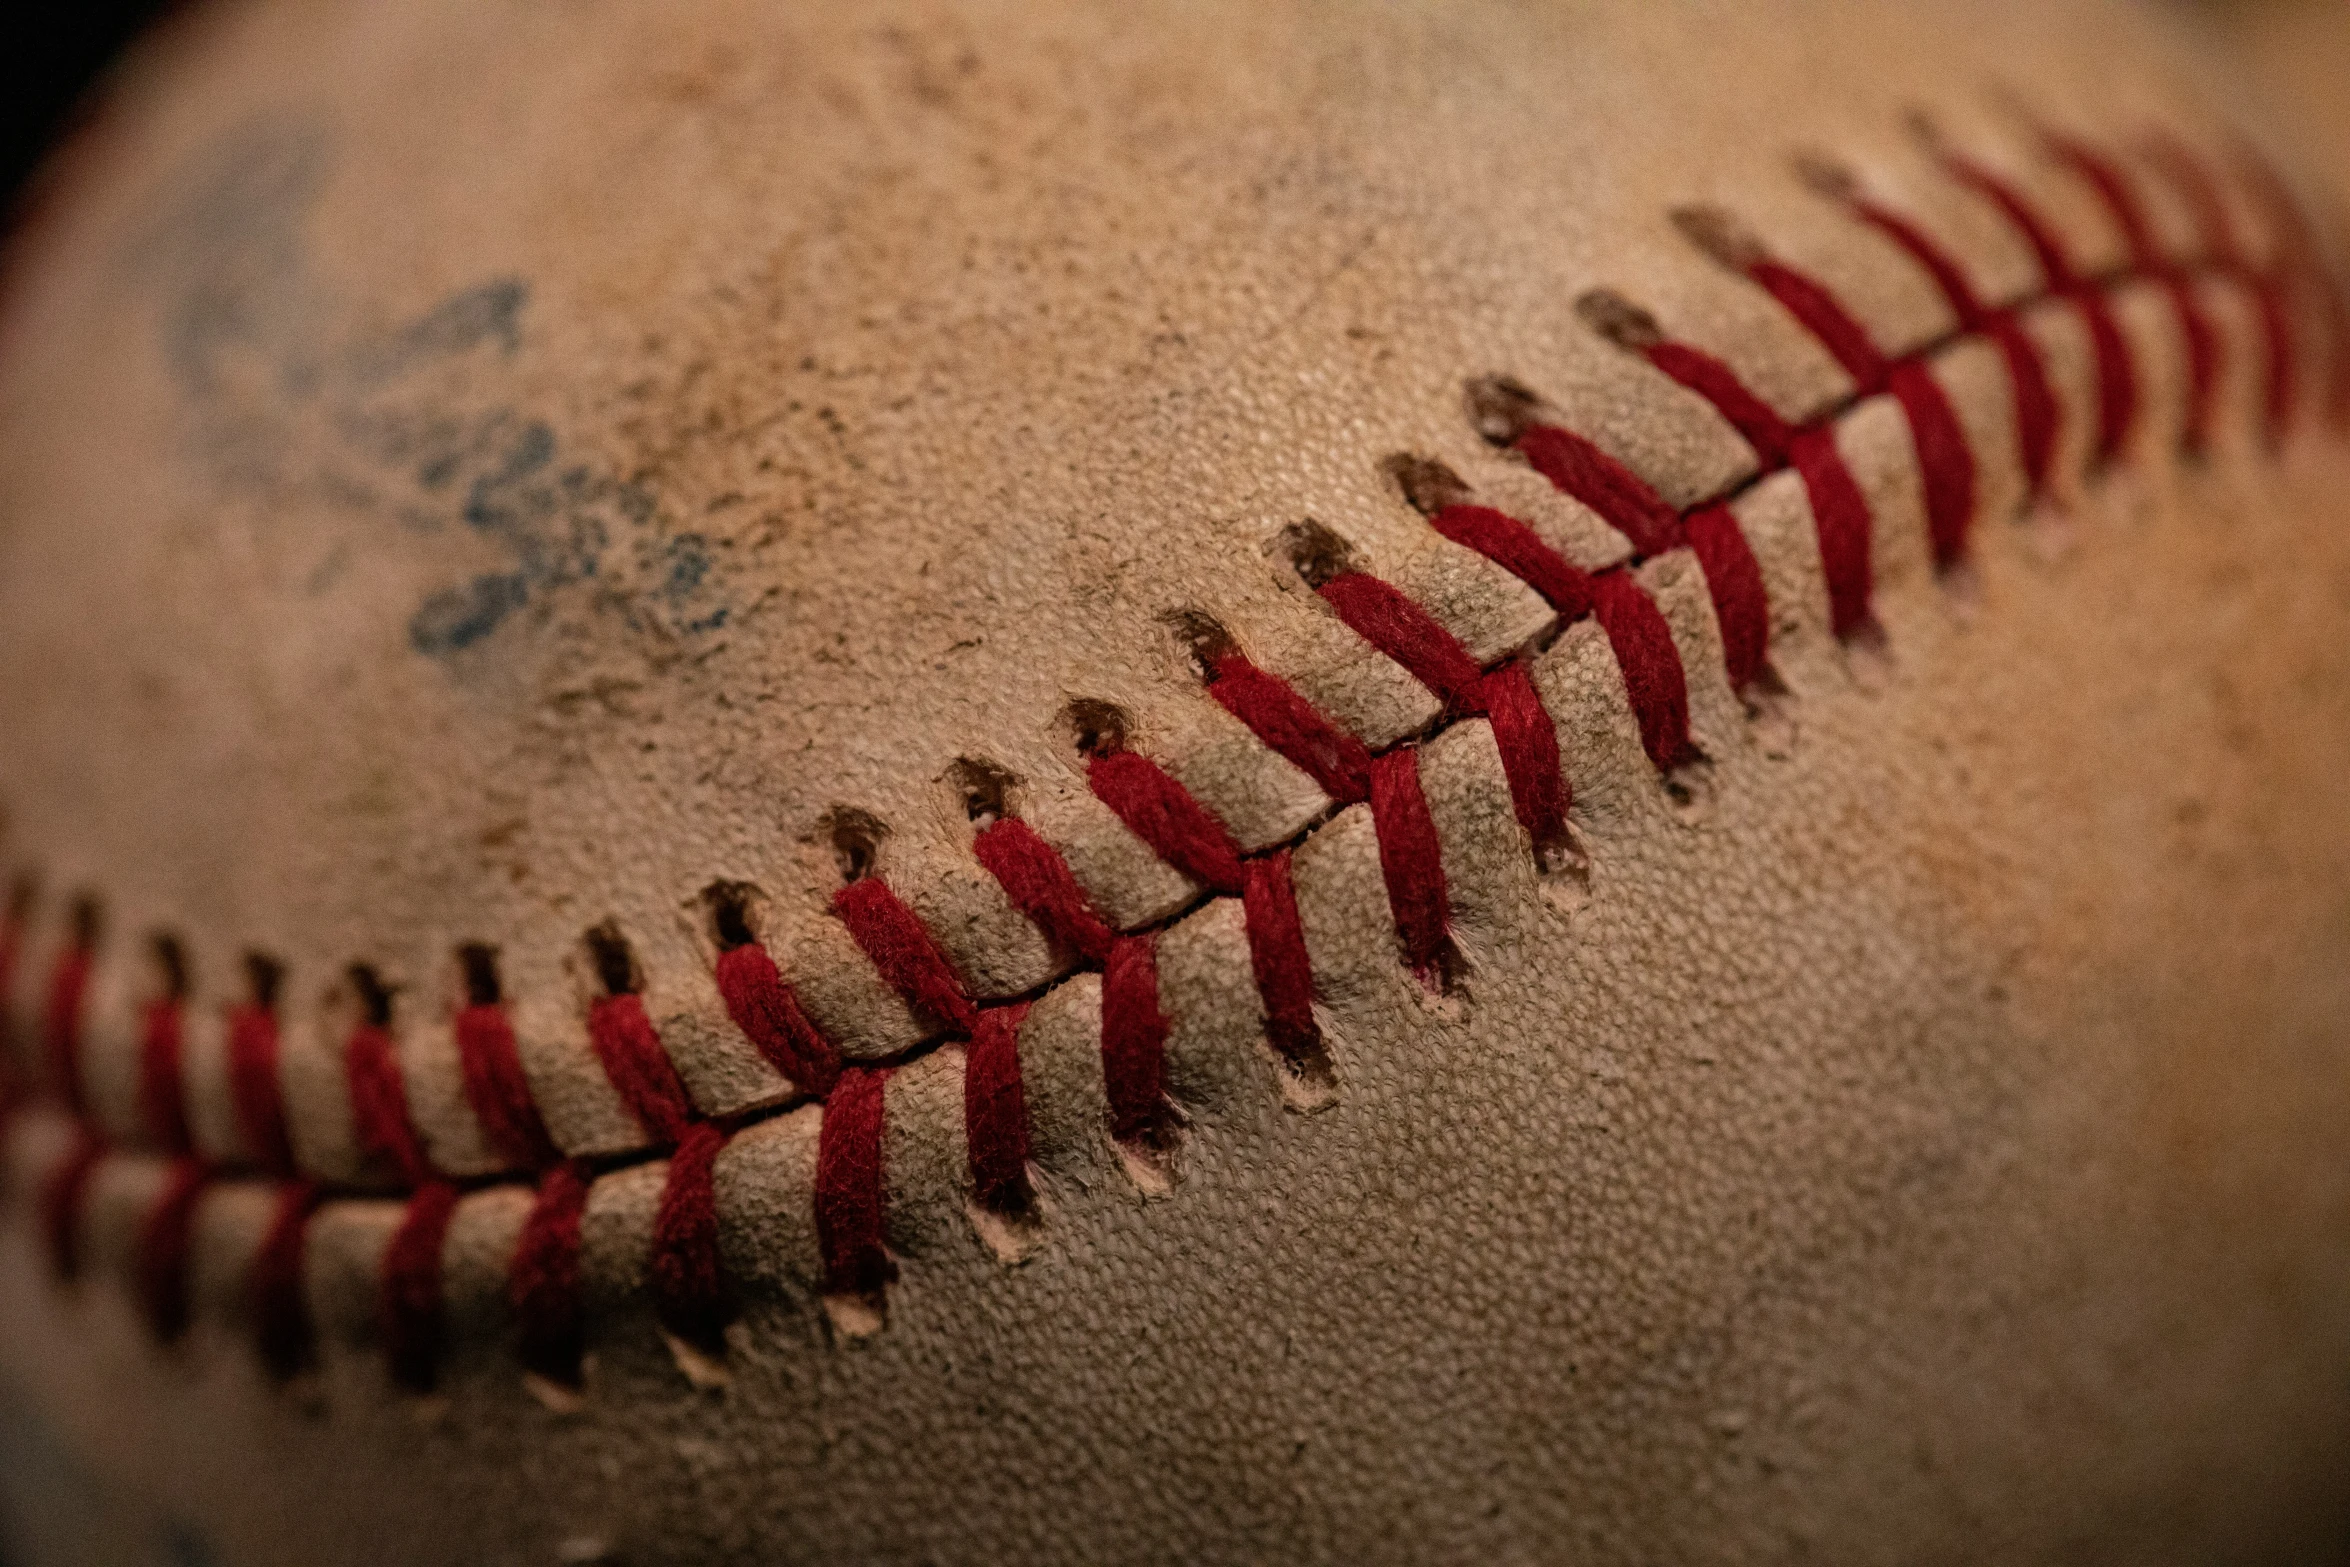 the stitches on an old baseball ball